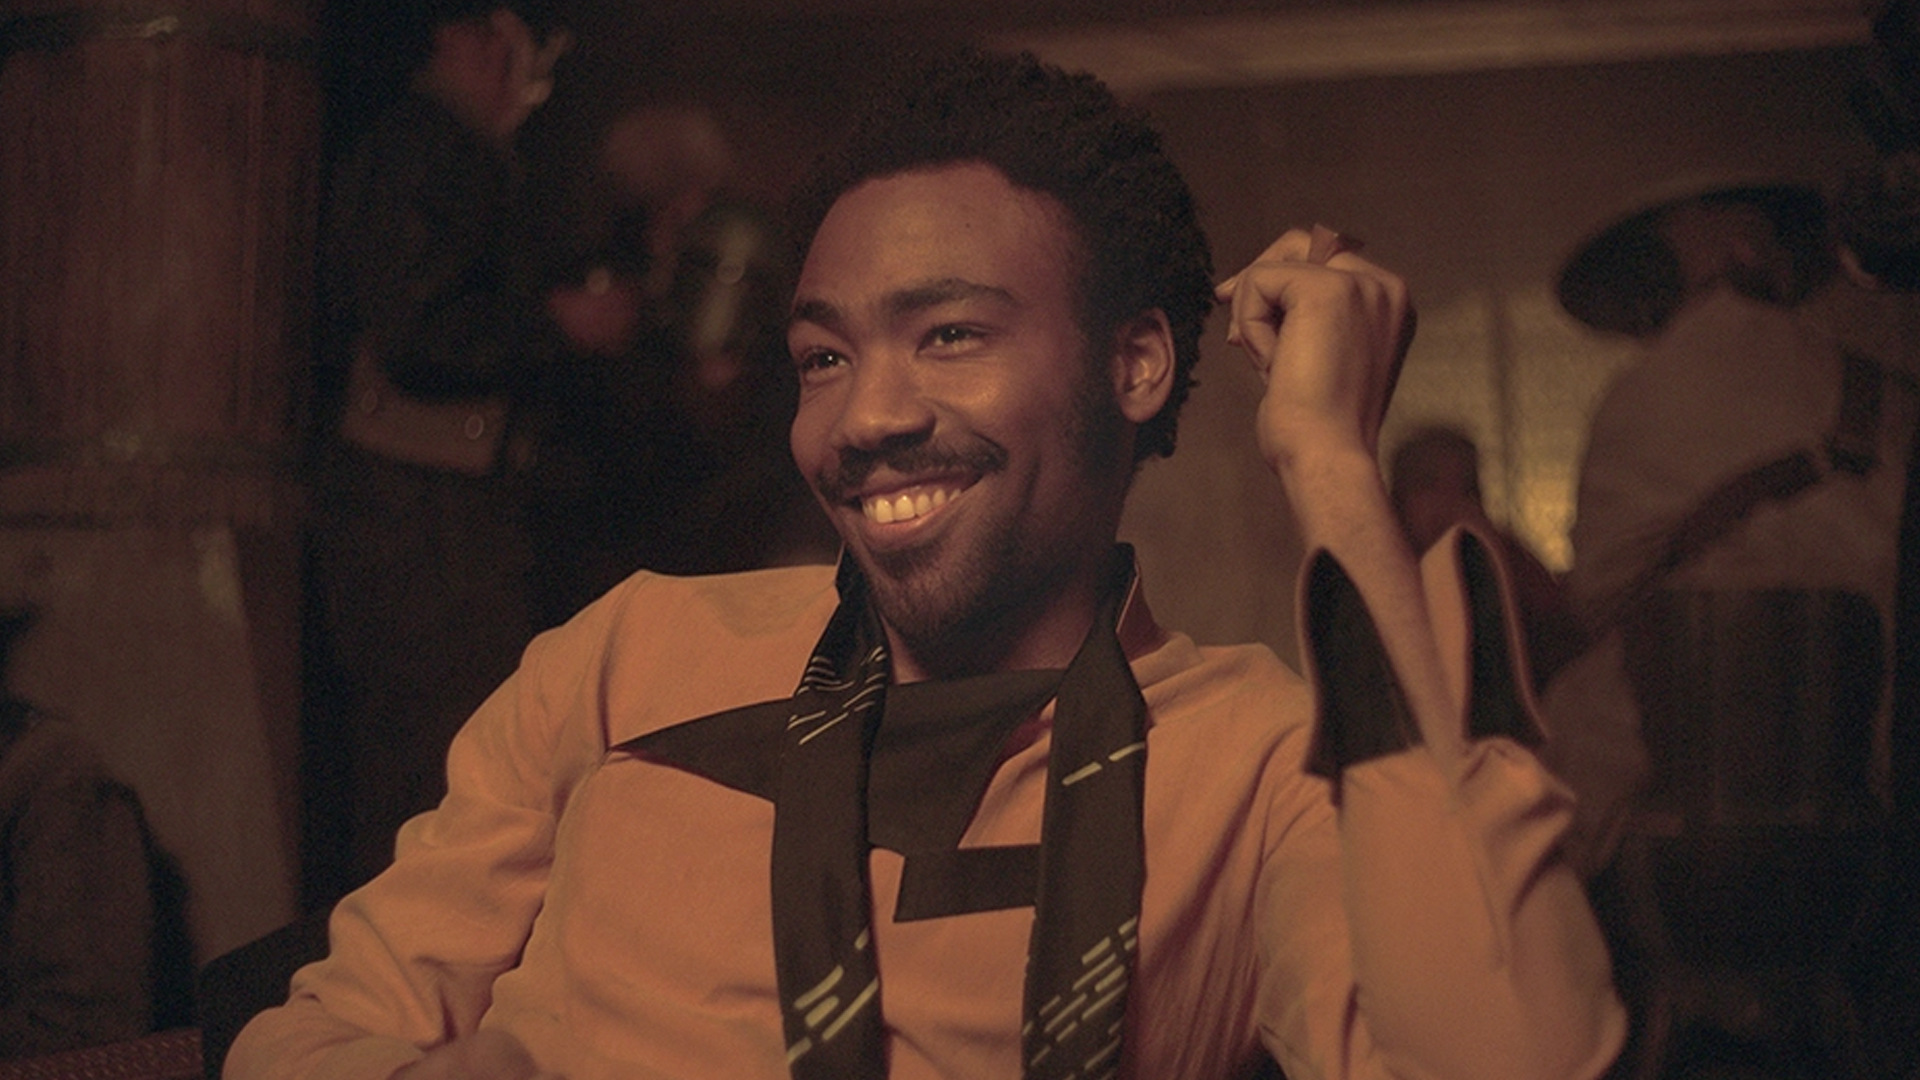 Lando from Solo: A Star Wars Story